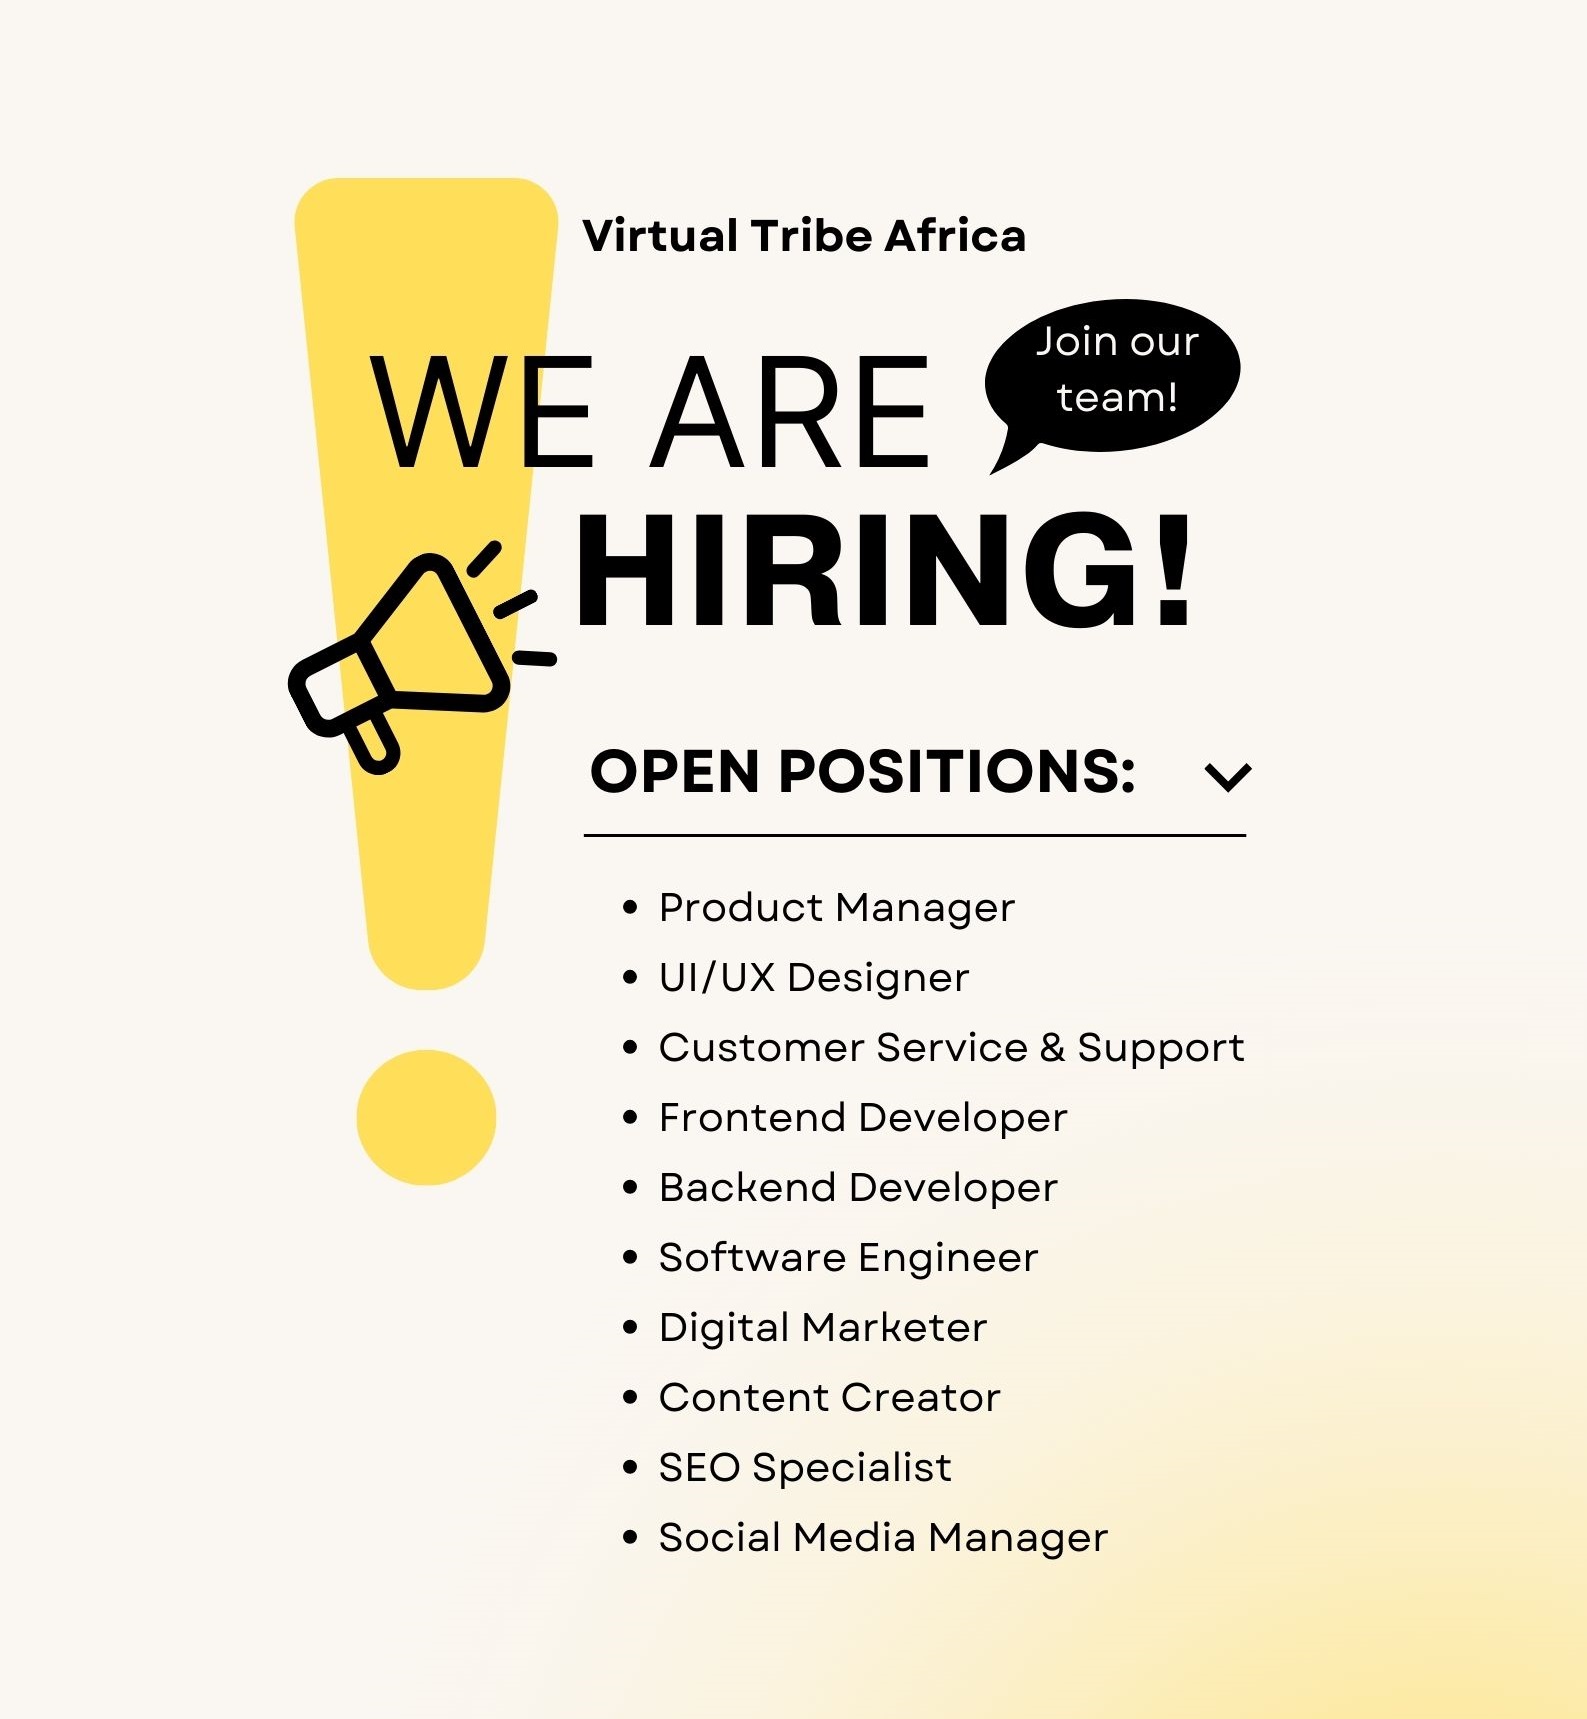 Product Manager Needed at Virtual Tribe Africa